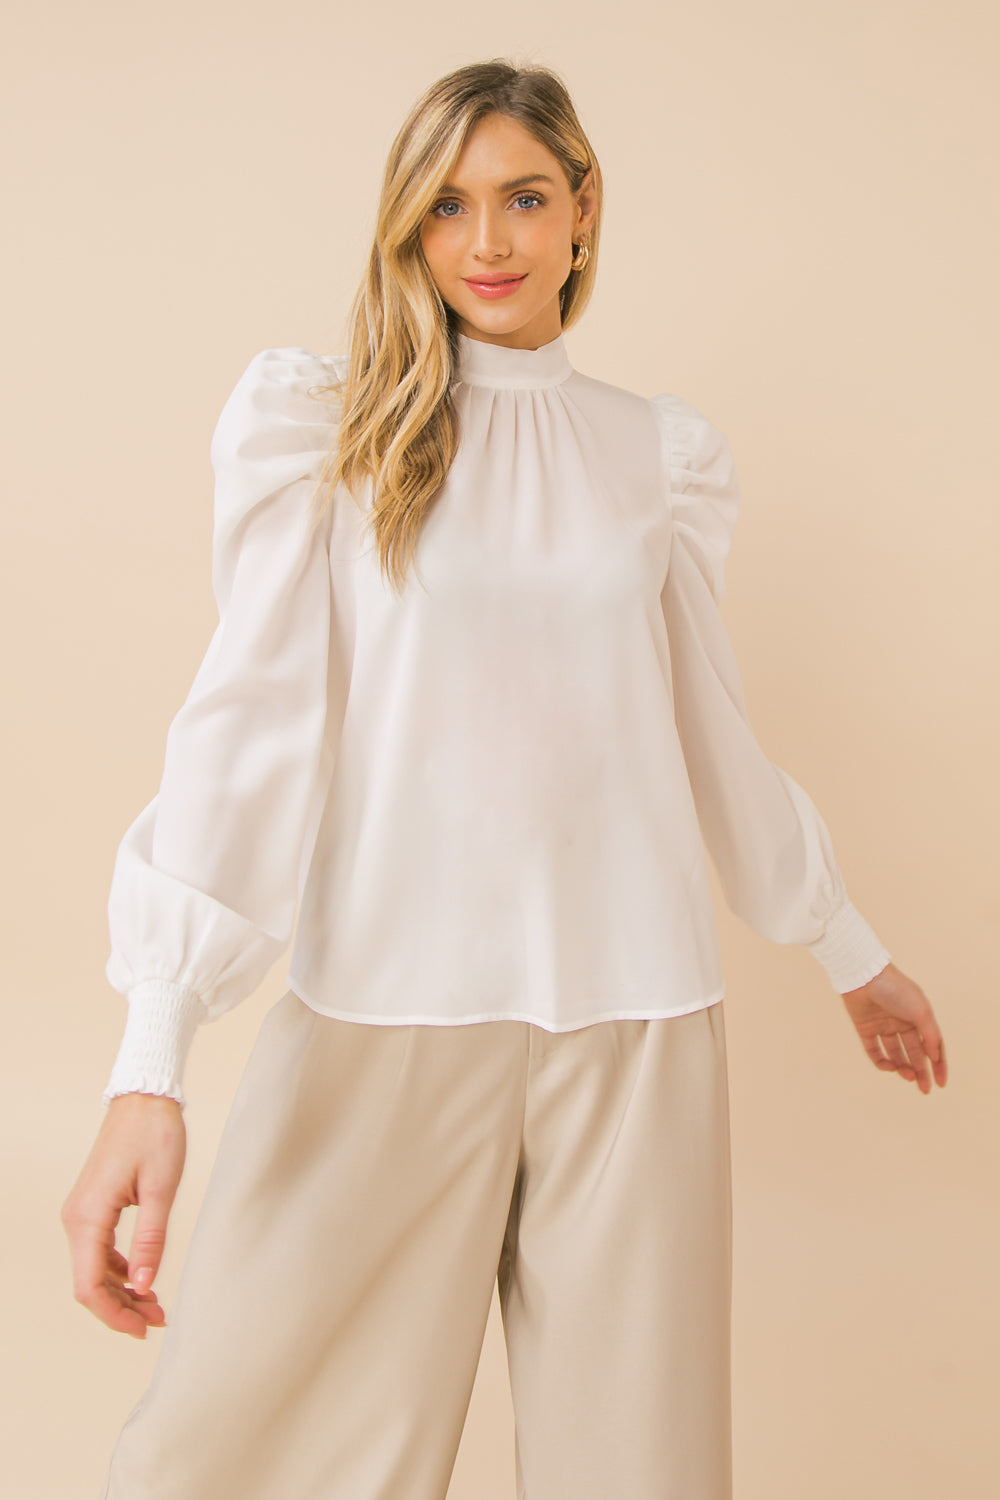 SET YOURSELF FREE BLOUSE